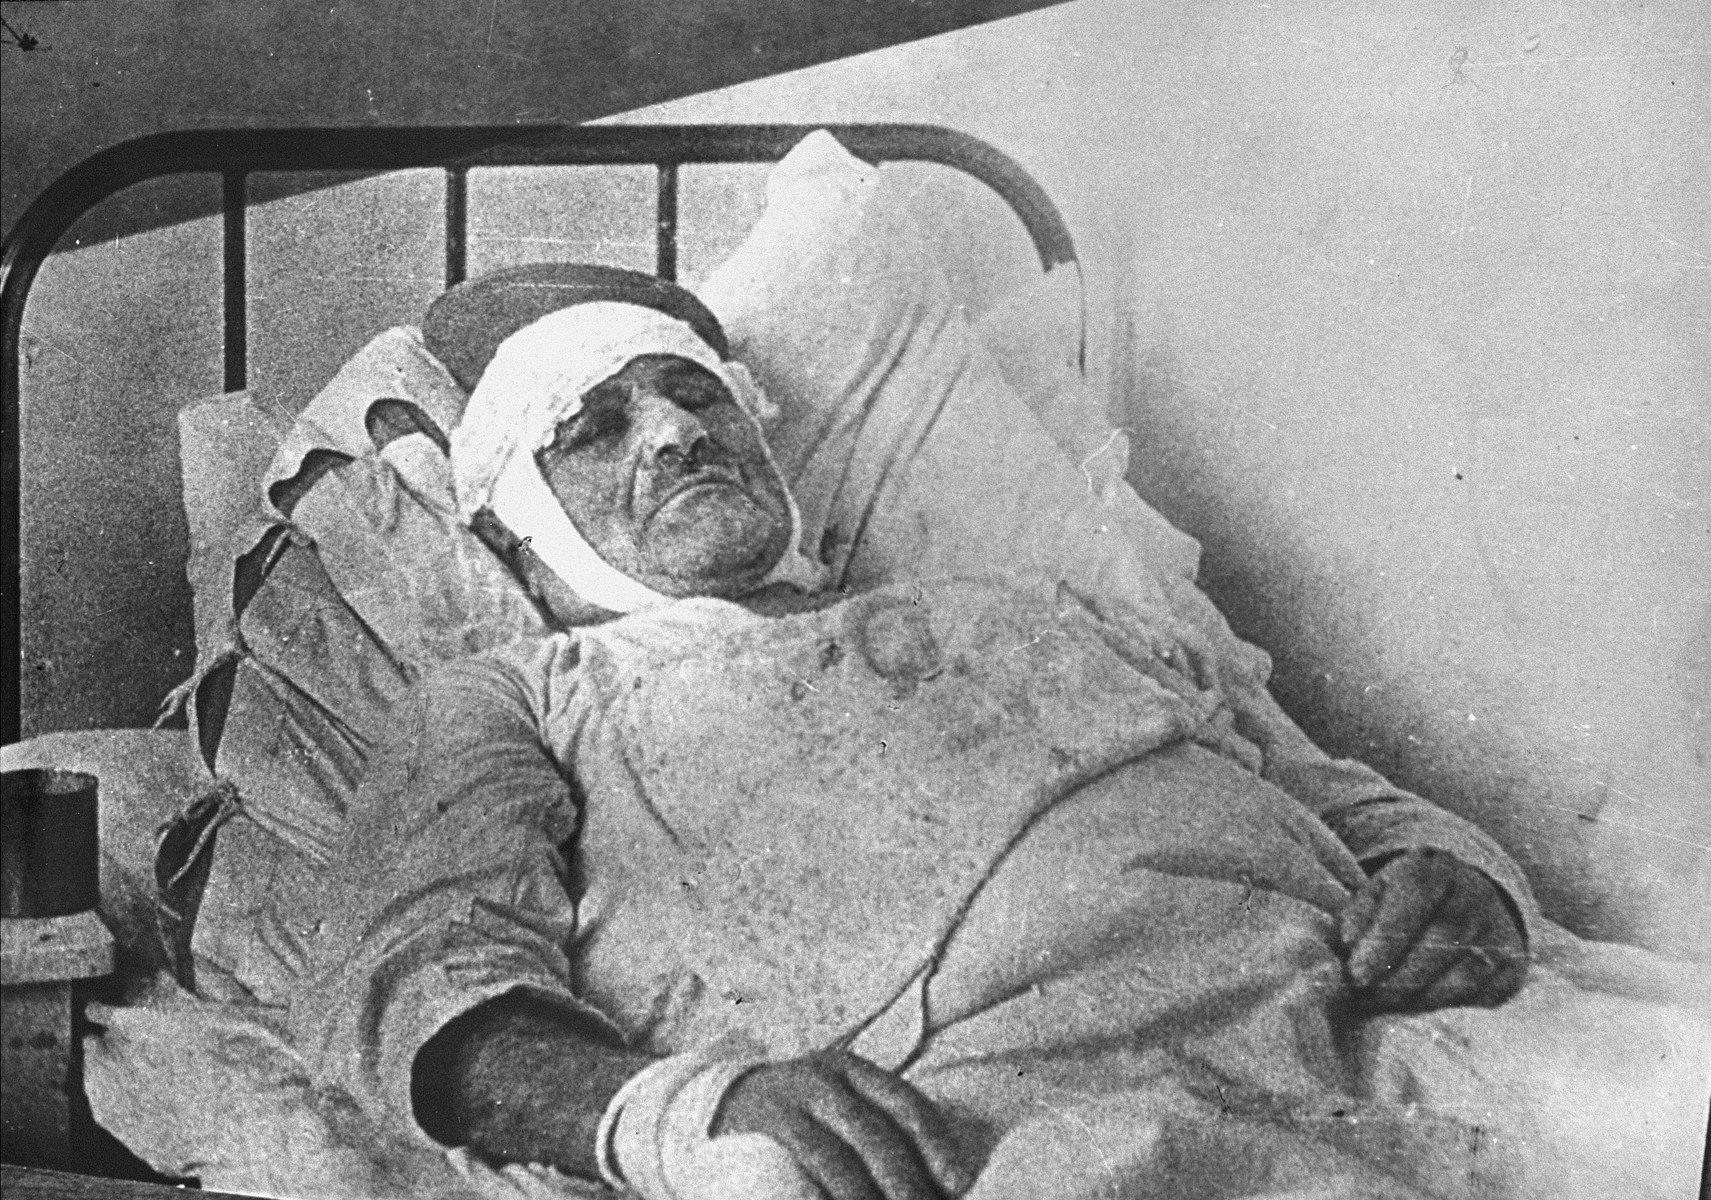 A Jewish man injured in the Kielce pogrom lies in a hospital bed.